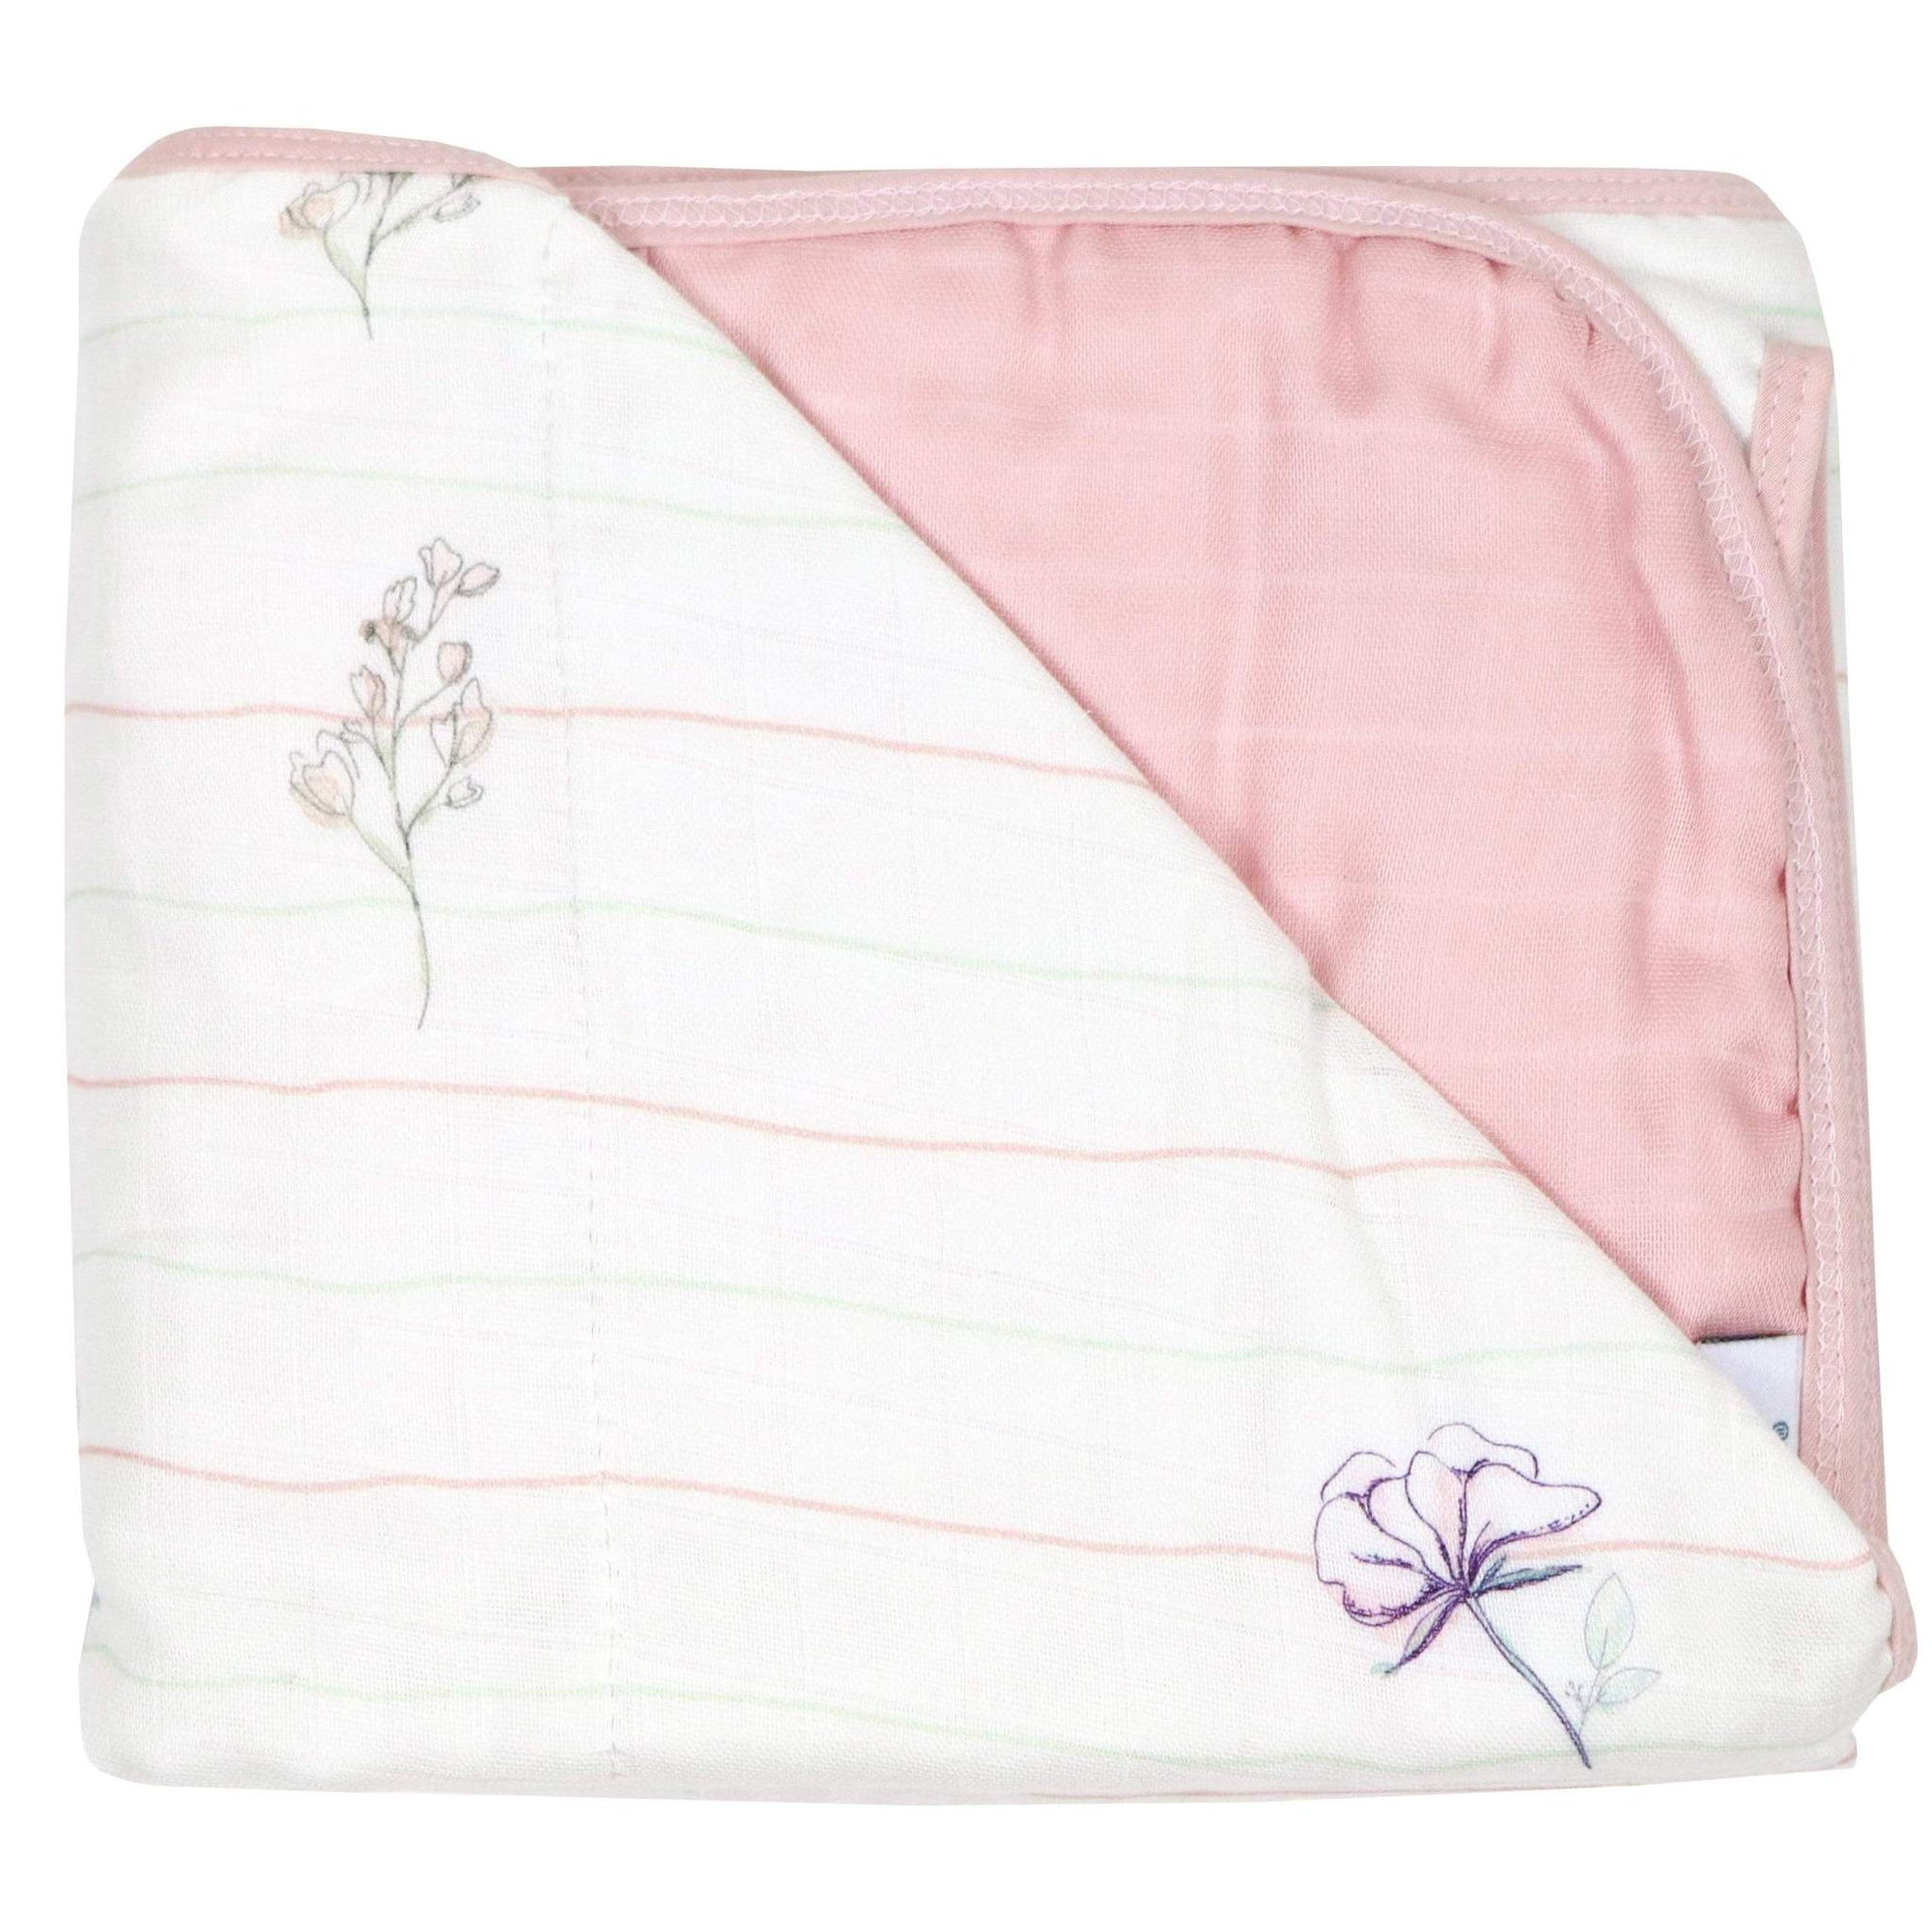 GooseWaddle Blanket Flowers & Light Pink Bamboo Muslin Quilted Blanket (Brick & Gray)